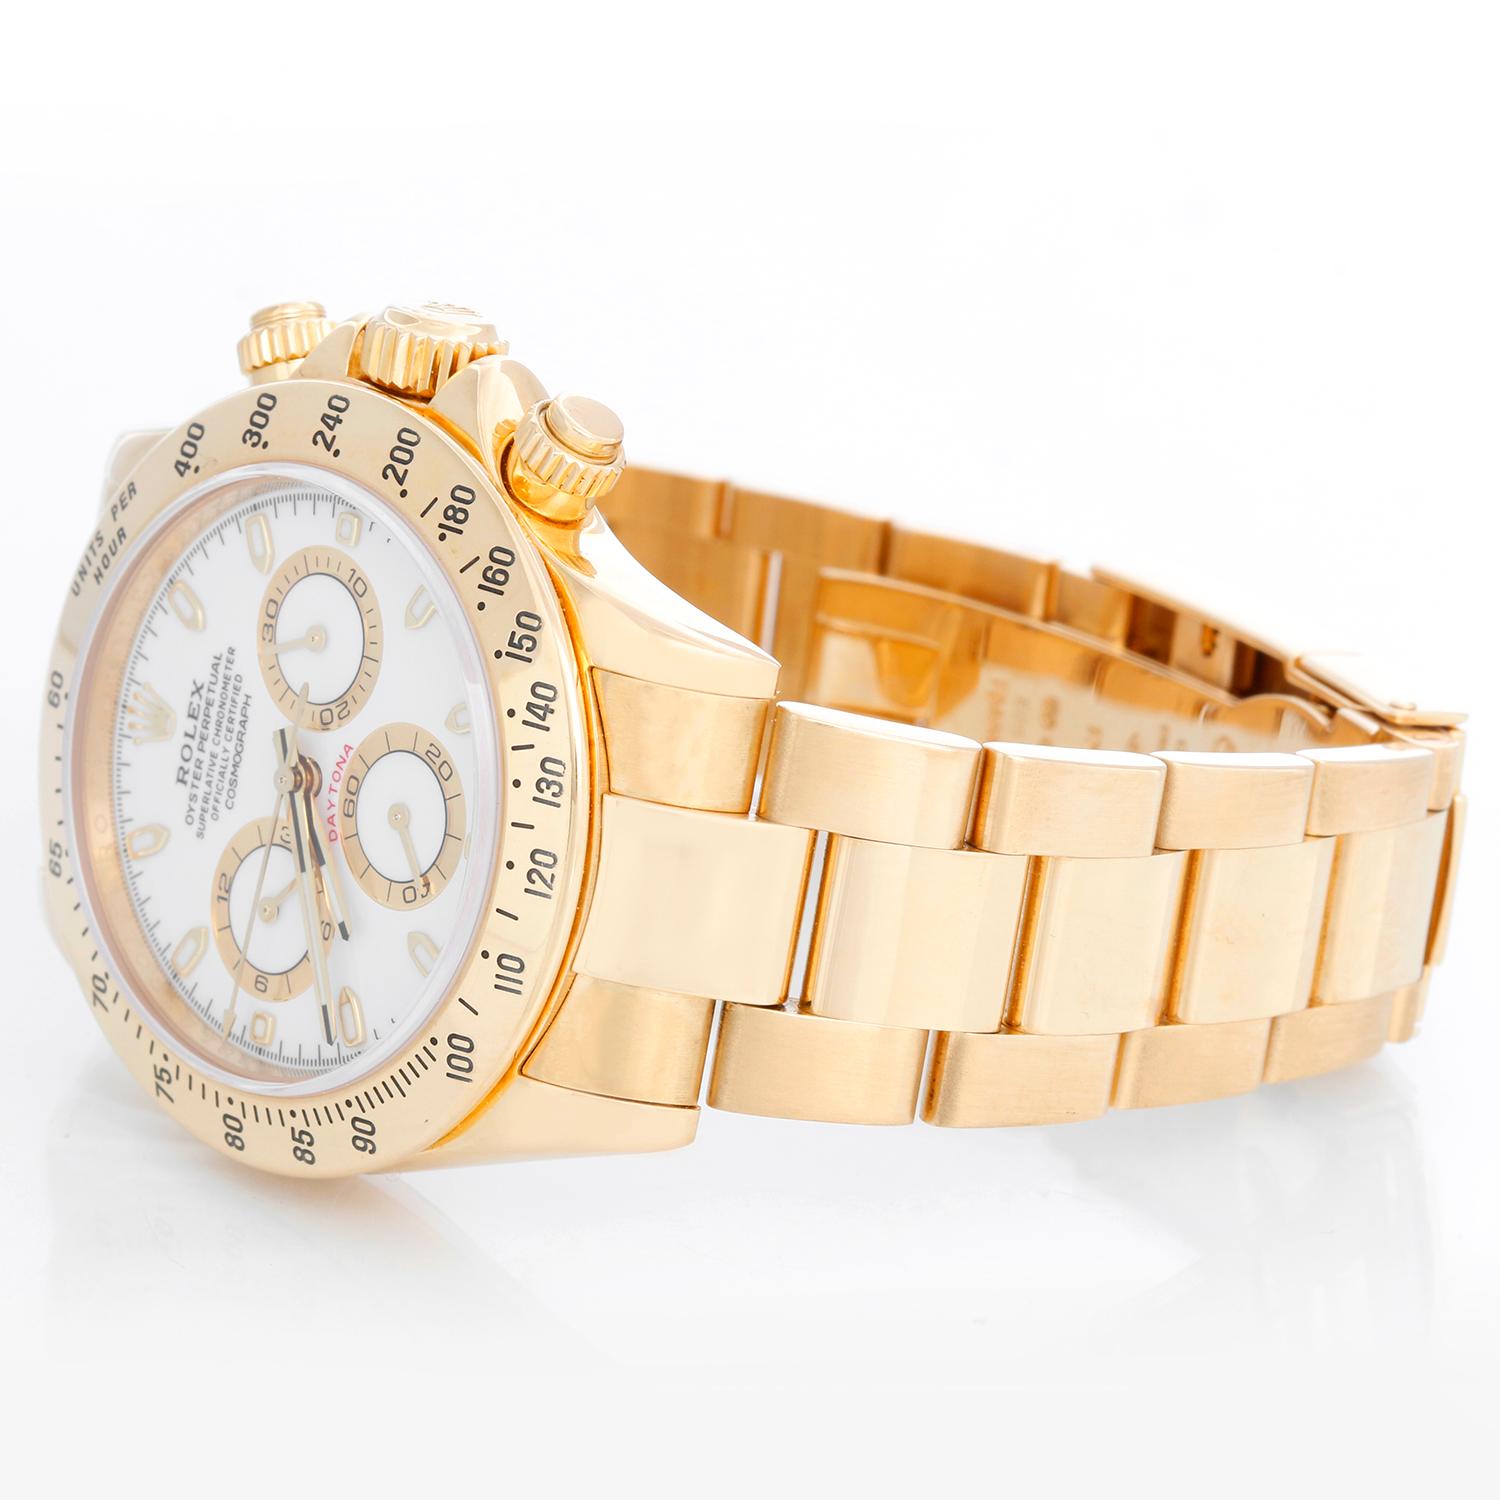 Rolex Cosmograph Daytona Men's Watch 116528 - Automatic winding, chronograph, 44 jewels, sapphire crystal. 18k yellow gold case (40 mm ). White dial with baton markers. 18k yellow gold Oyster bracelet with flip-lock clasp. Pre-owned with Rolex box,